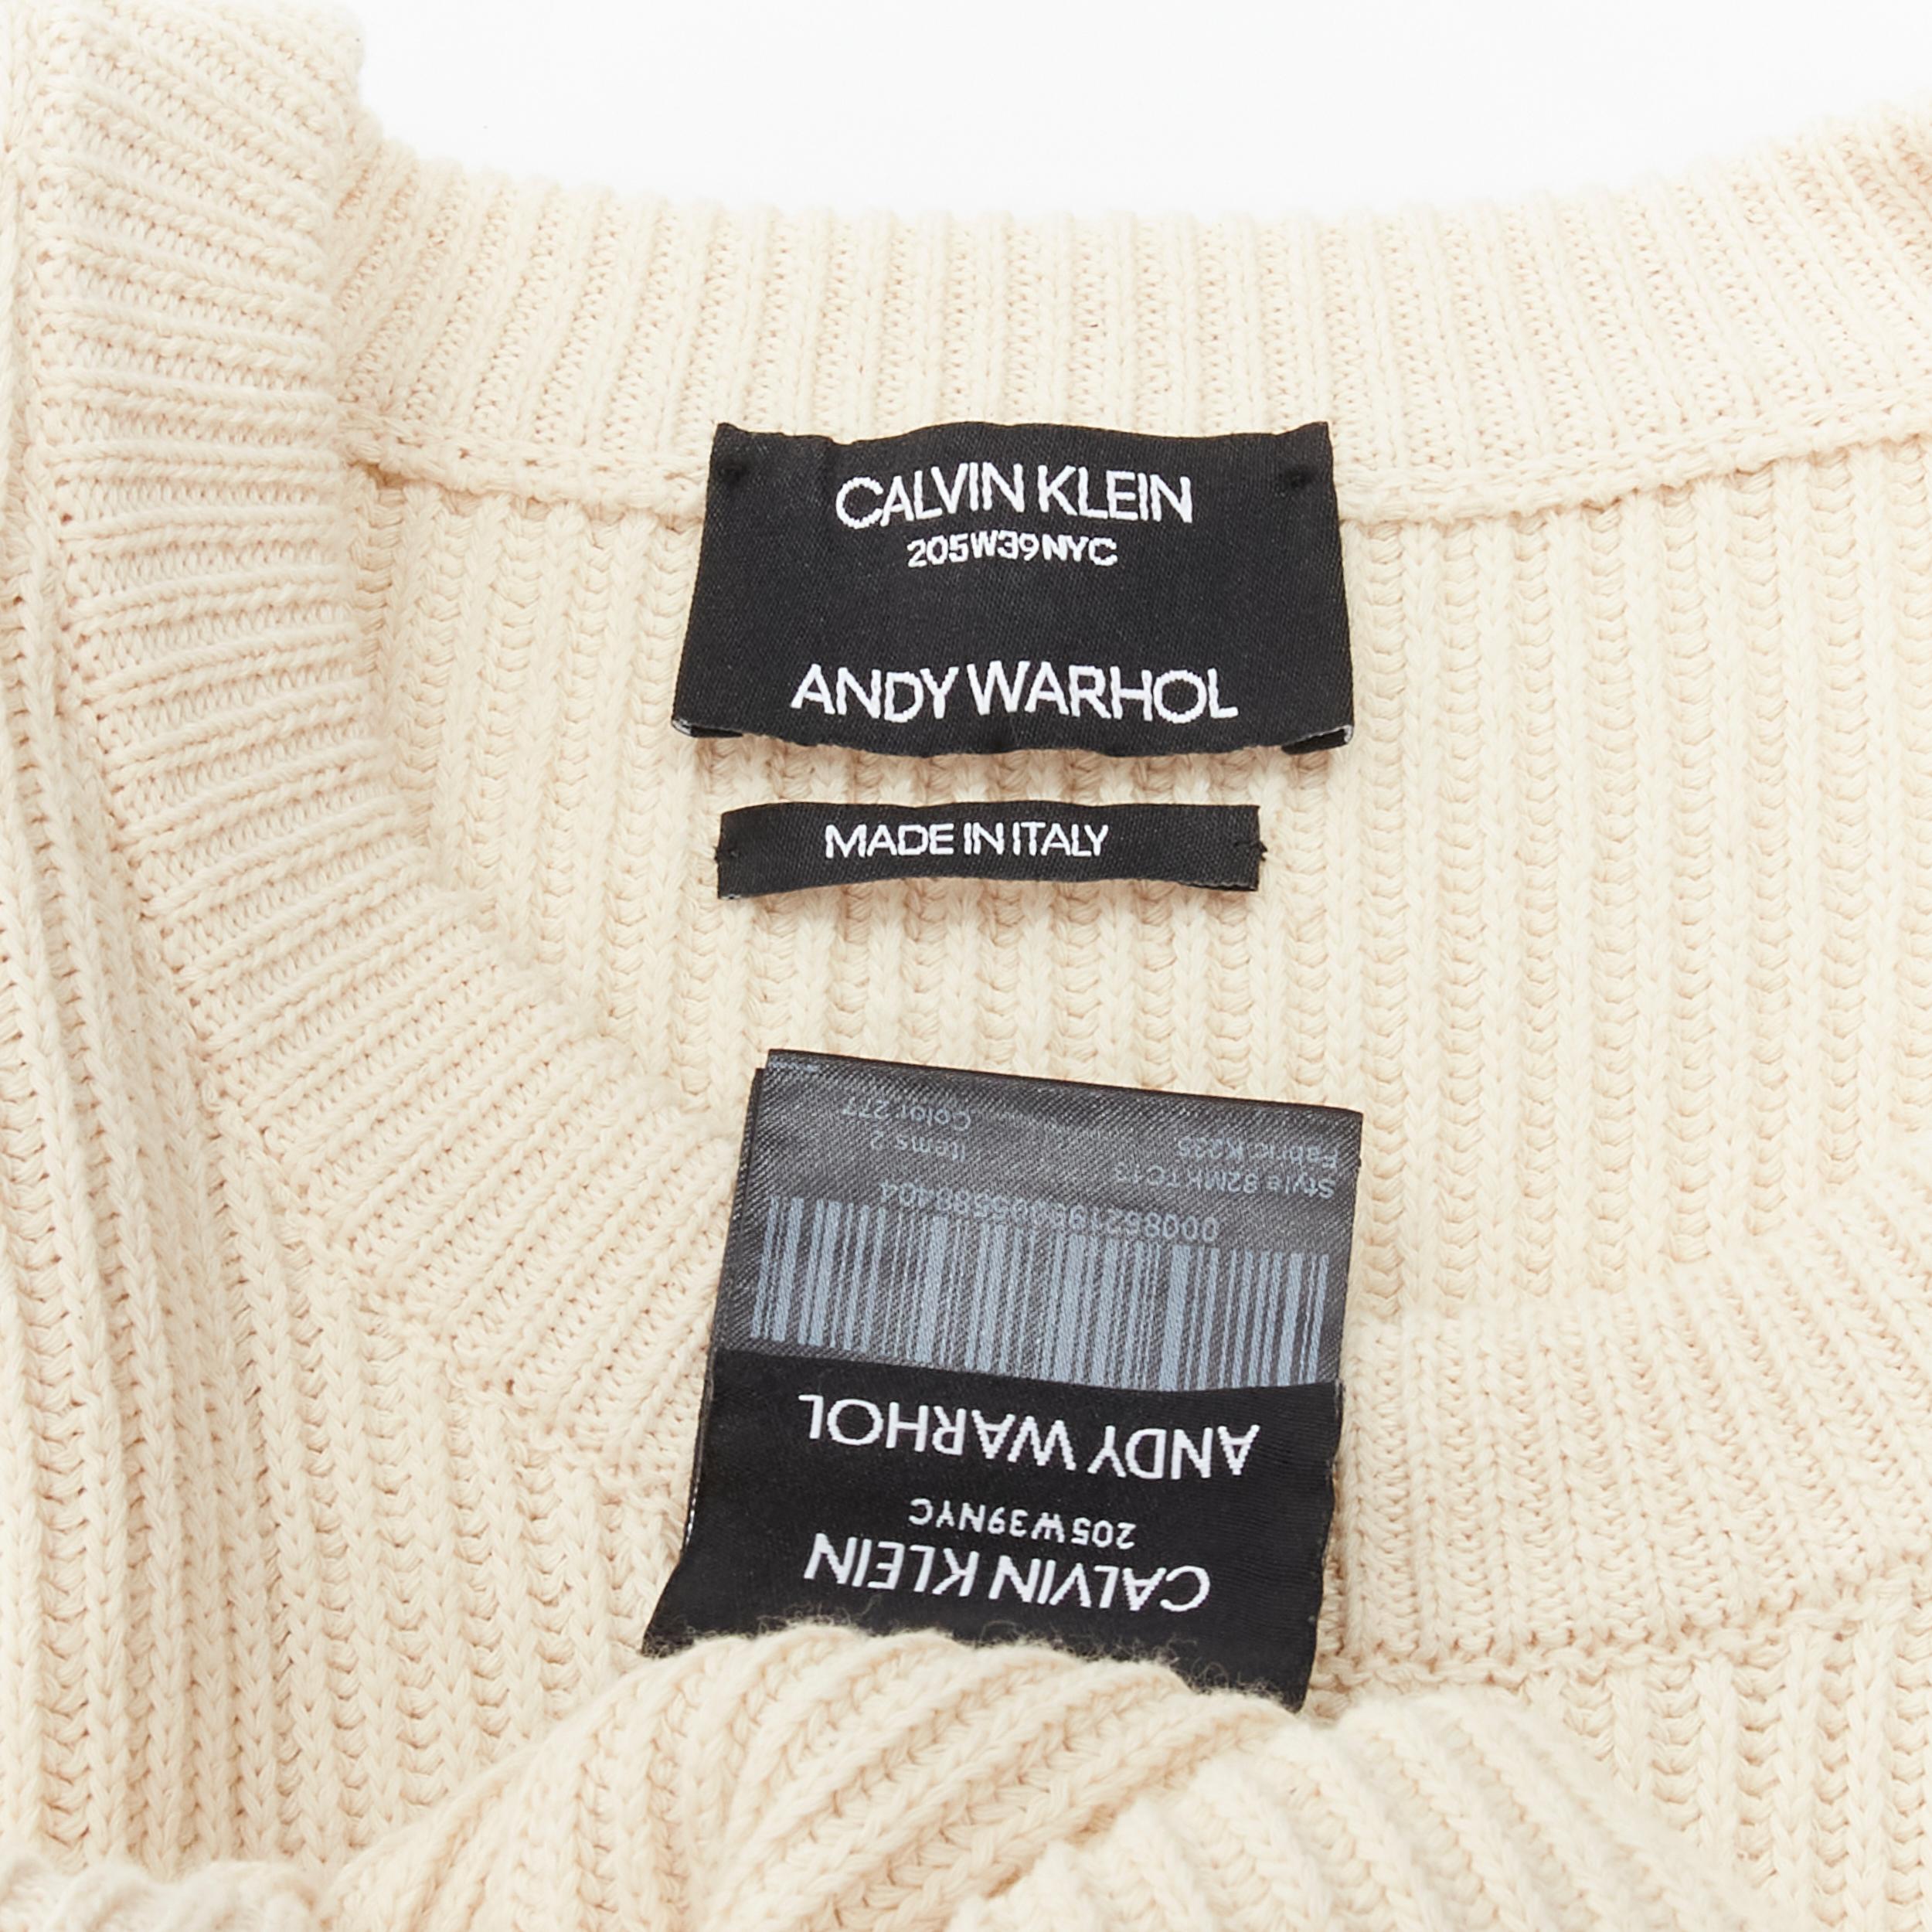 CALVIN KLEIN 295W39NYV Andy Warhol patchwork beige ribbed cotton sweater M 1